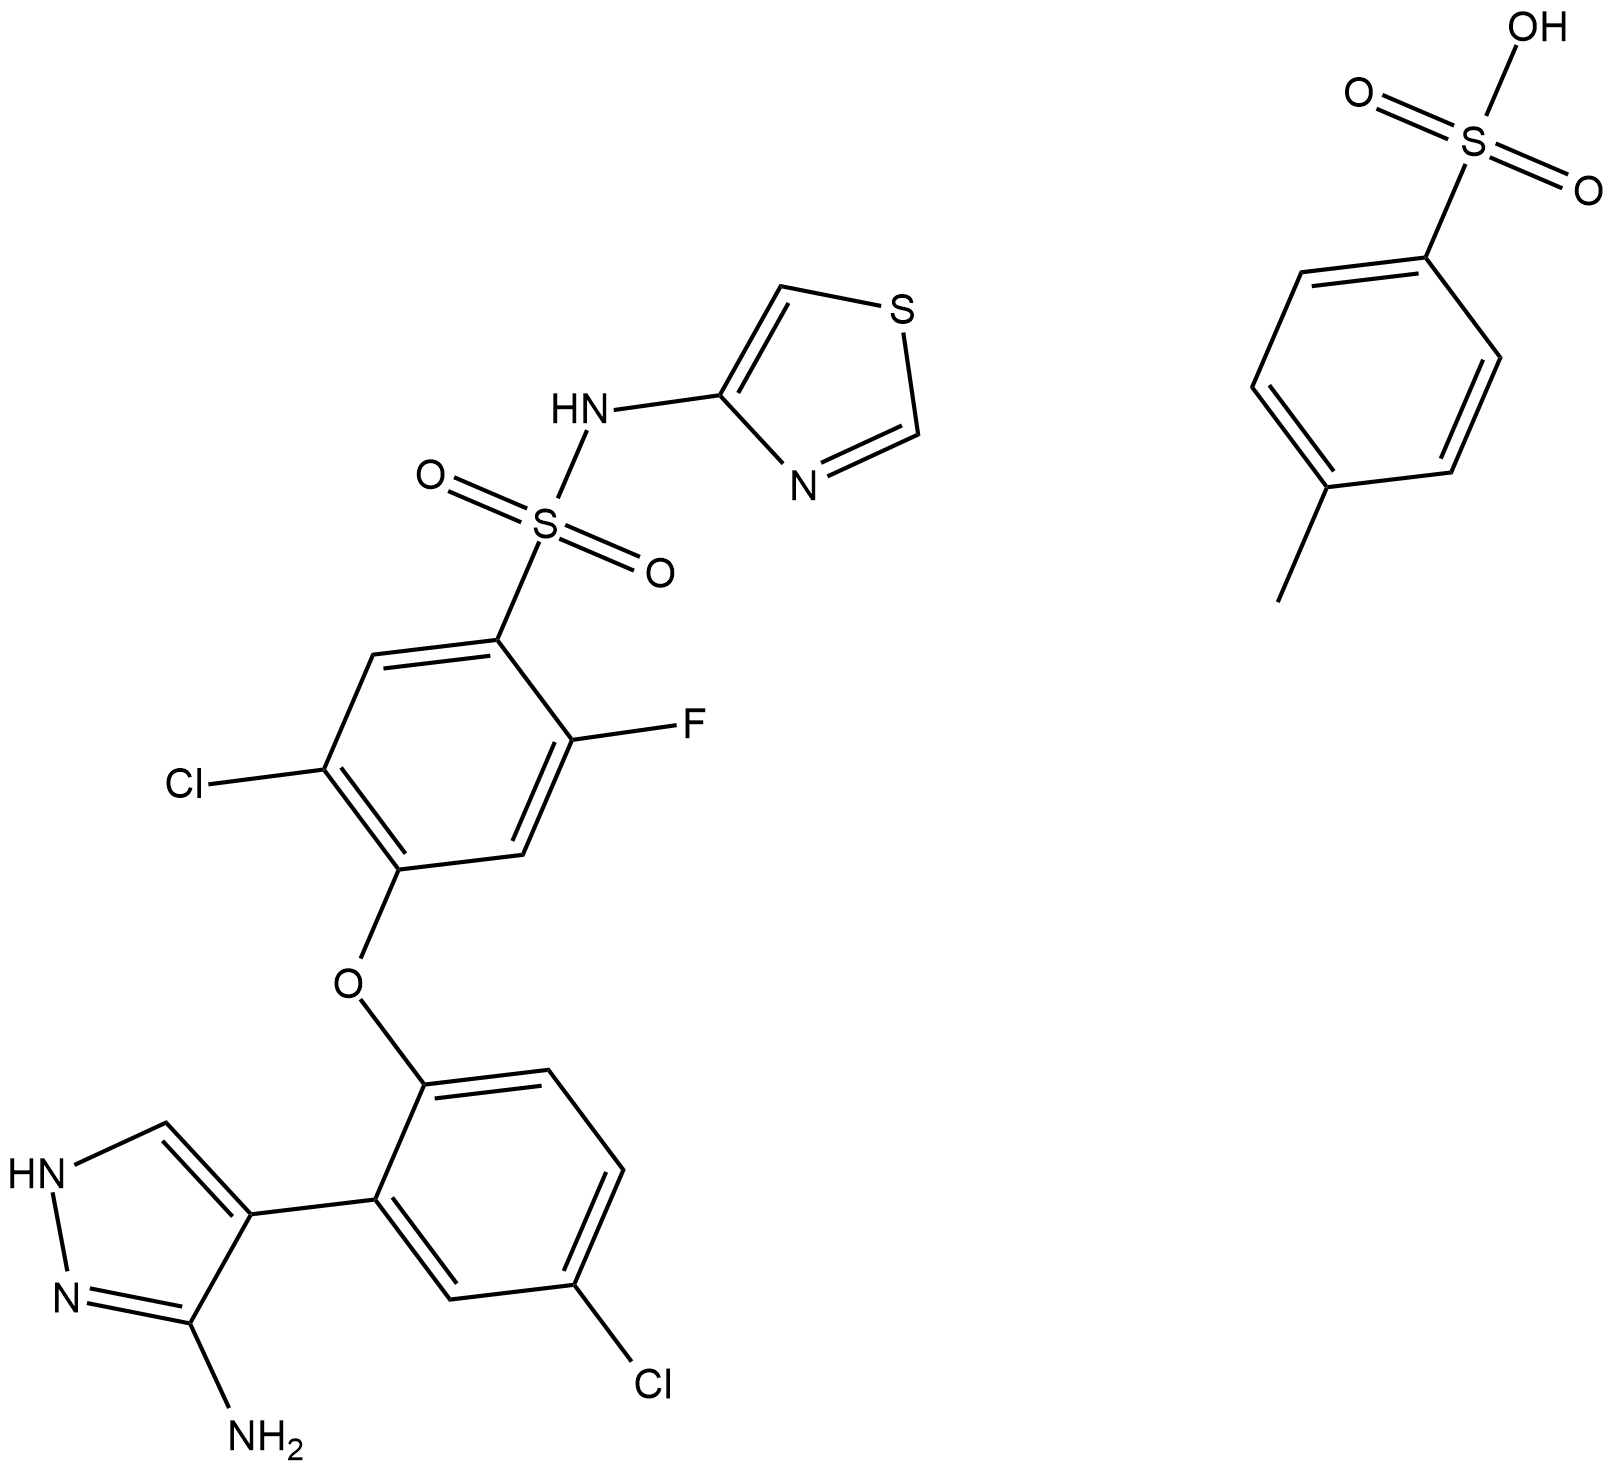 PF-05089771 (tosylate)  Chemical Structure